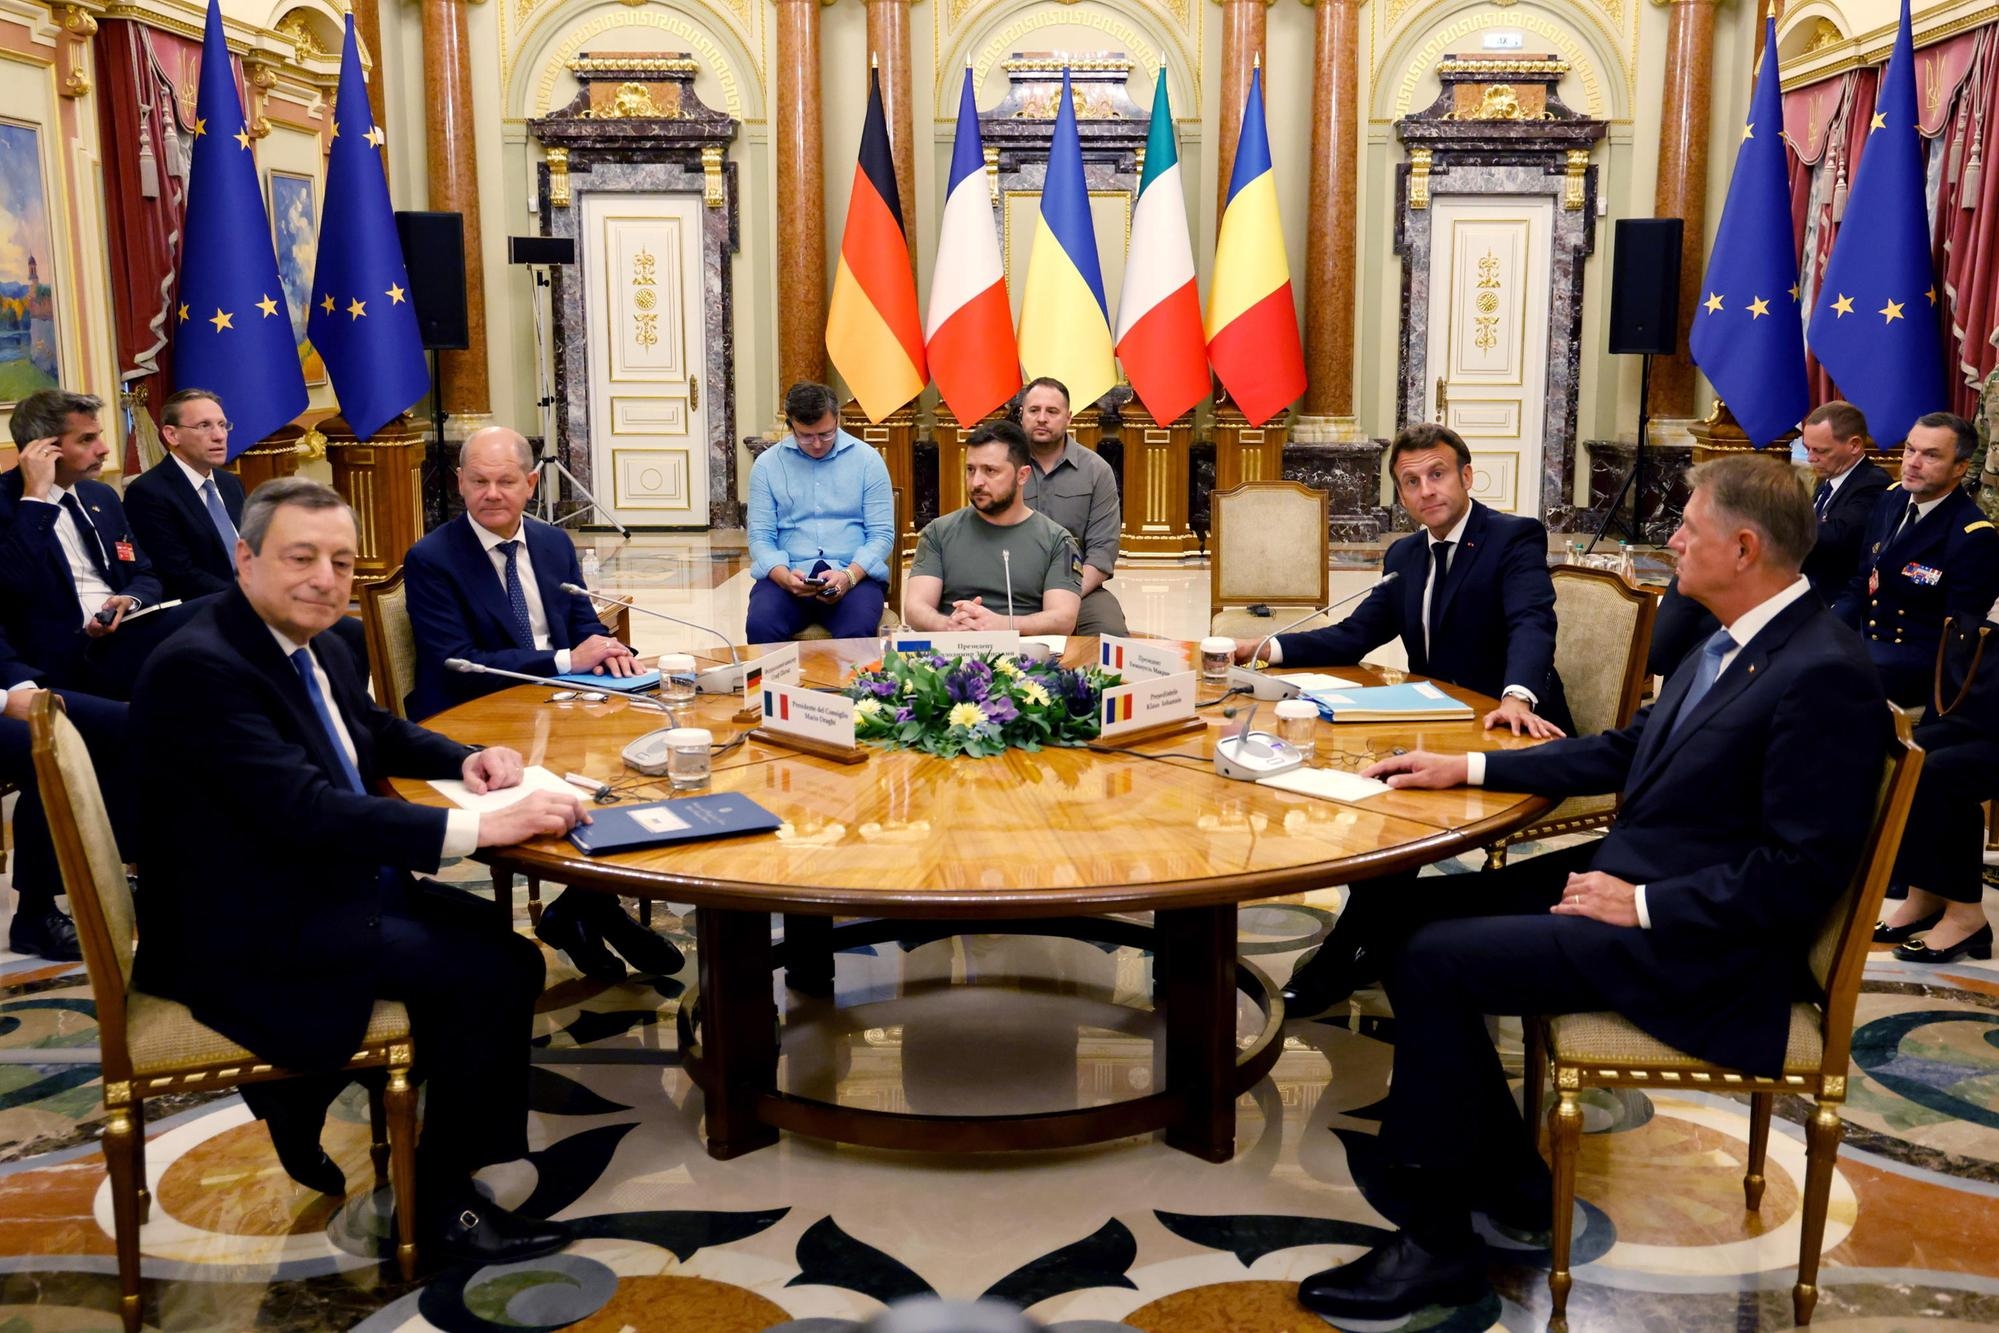 epa10015819 (L-R) Italian Prime Minister Mario Draghi, German Chancellor Olaf Scholz, Ukrainian President Volodymyr Zelensky, French President Emmanuel Macron and Romanian President Klaus Iohannis meet for a working session in Mariinsky Palace, in Kyiv, Ukraine, 16 June 2022. French President Emmanuel Macron, Italian Prime Minister Mario Draghi and German Chancellor Olaf Scholz arrived on a night train from Poland to Kyiv and will meet Ukrainian President Volodymyr Zelensky, at a time when the country is pushing for EU membership. EPA/LUDOVIC MARIN / POOL MAXPPP OUT